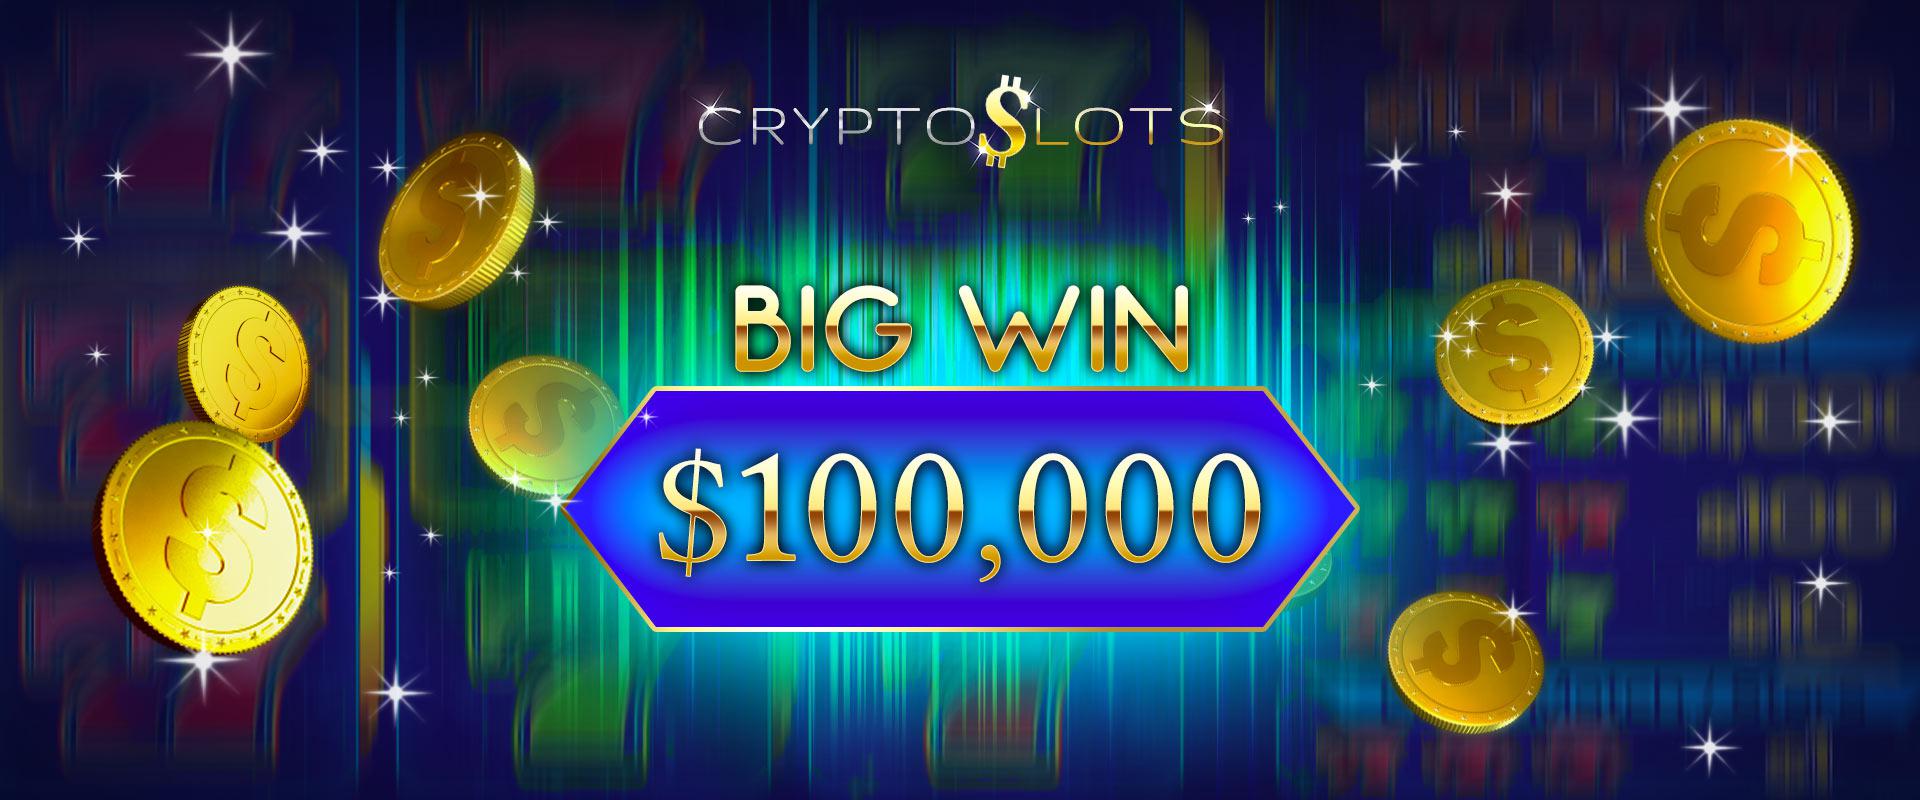 CryptoSlots Player Pockets Over $100,000 on the Provably Fair ‘Jackpot Trigger’